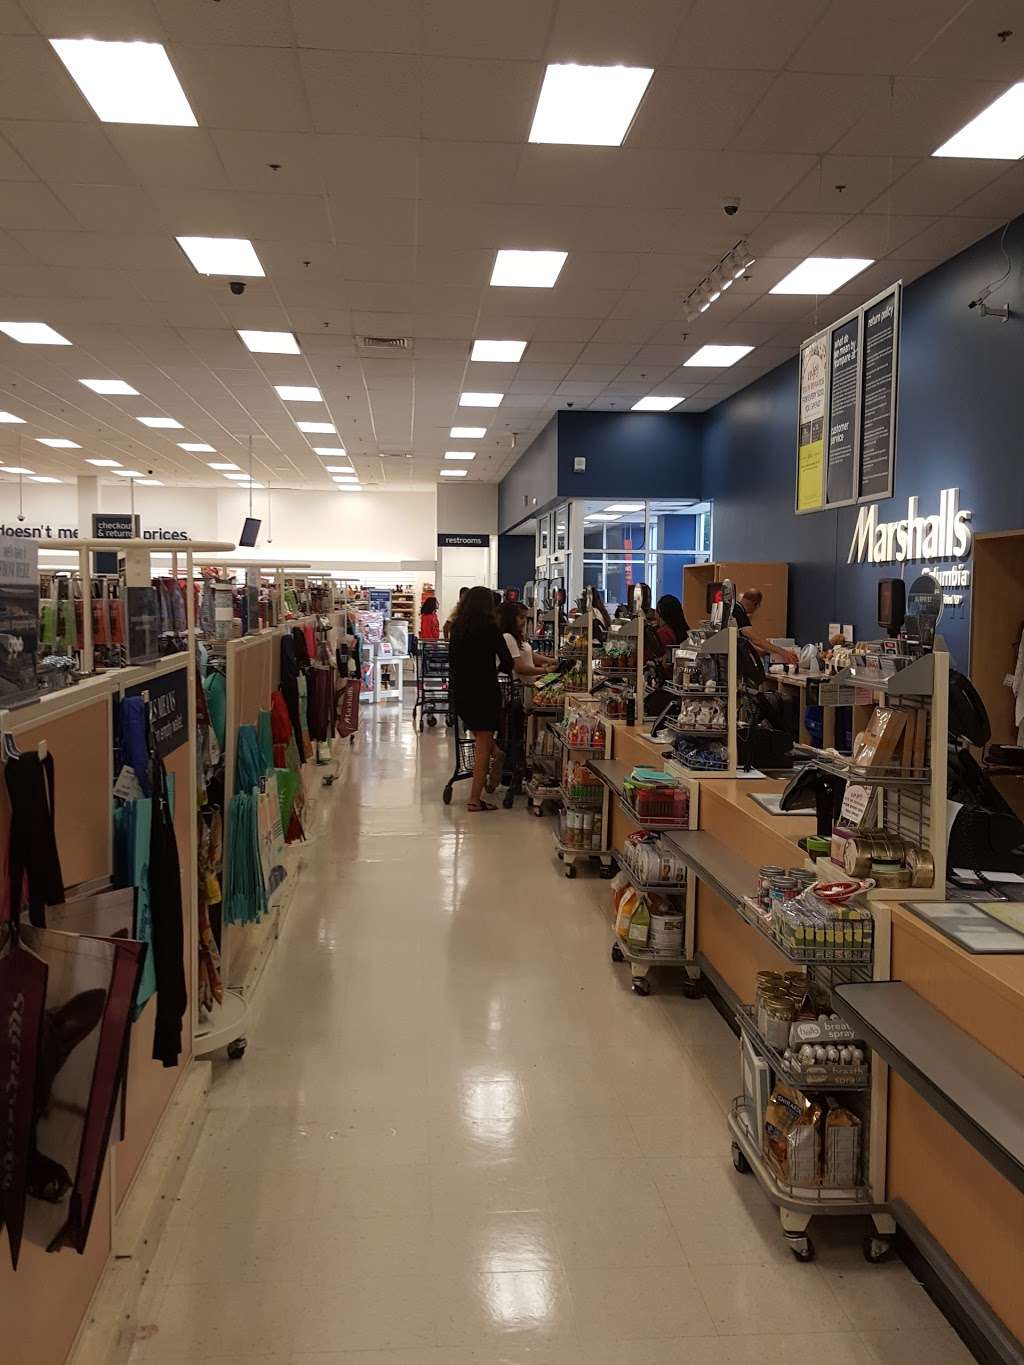 Marshalls | 9031 Snowden River Pkwy, Columbia, MD 21046 | Phone: (410) 312-4809